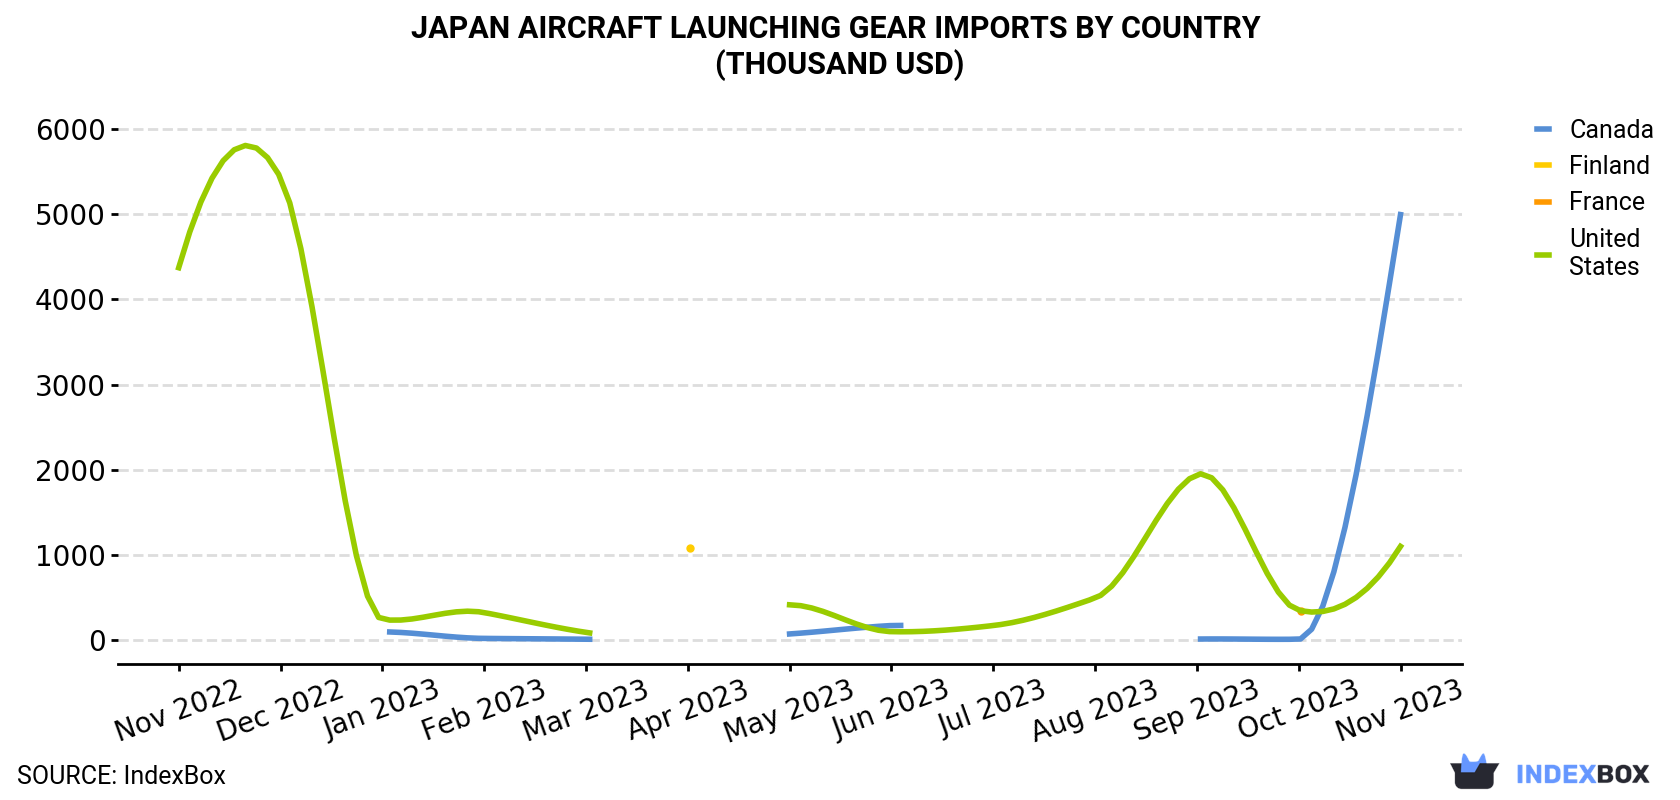 Japan Aircraft Launching Gear Imports By Country (Thousand USD)